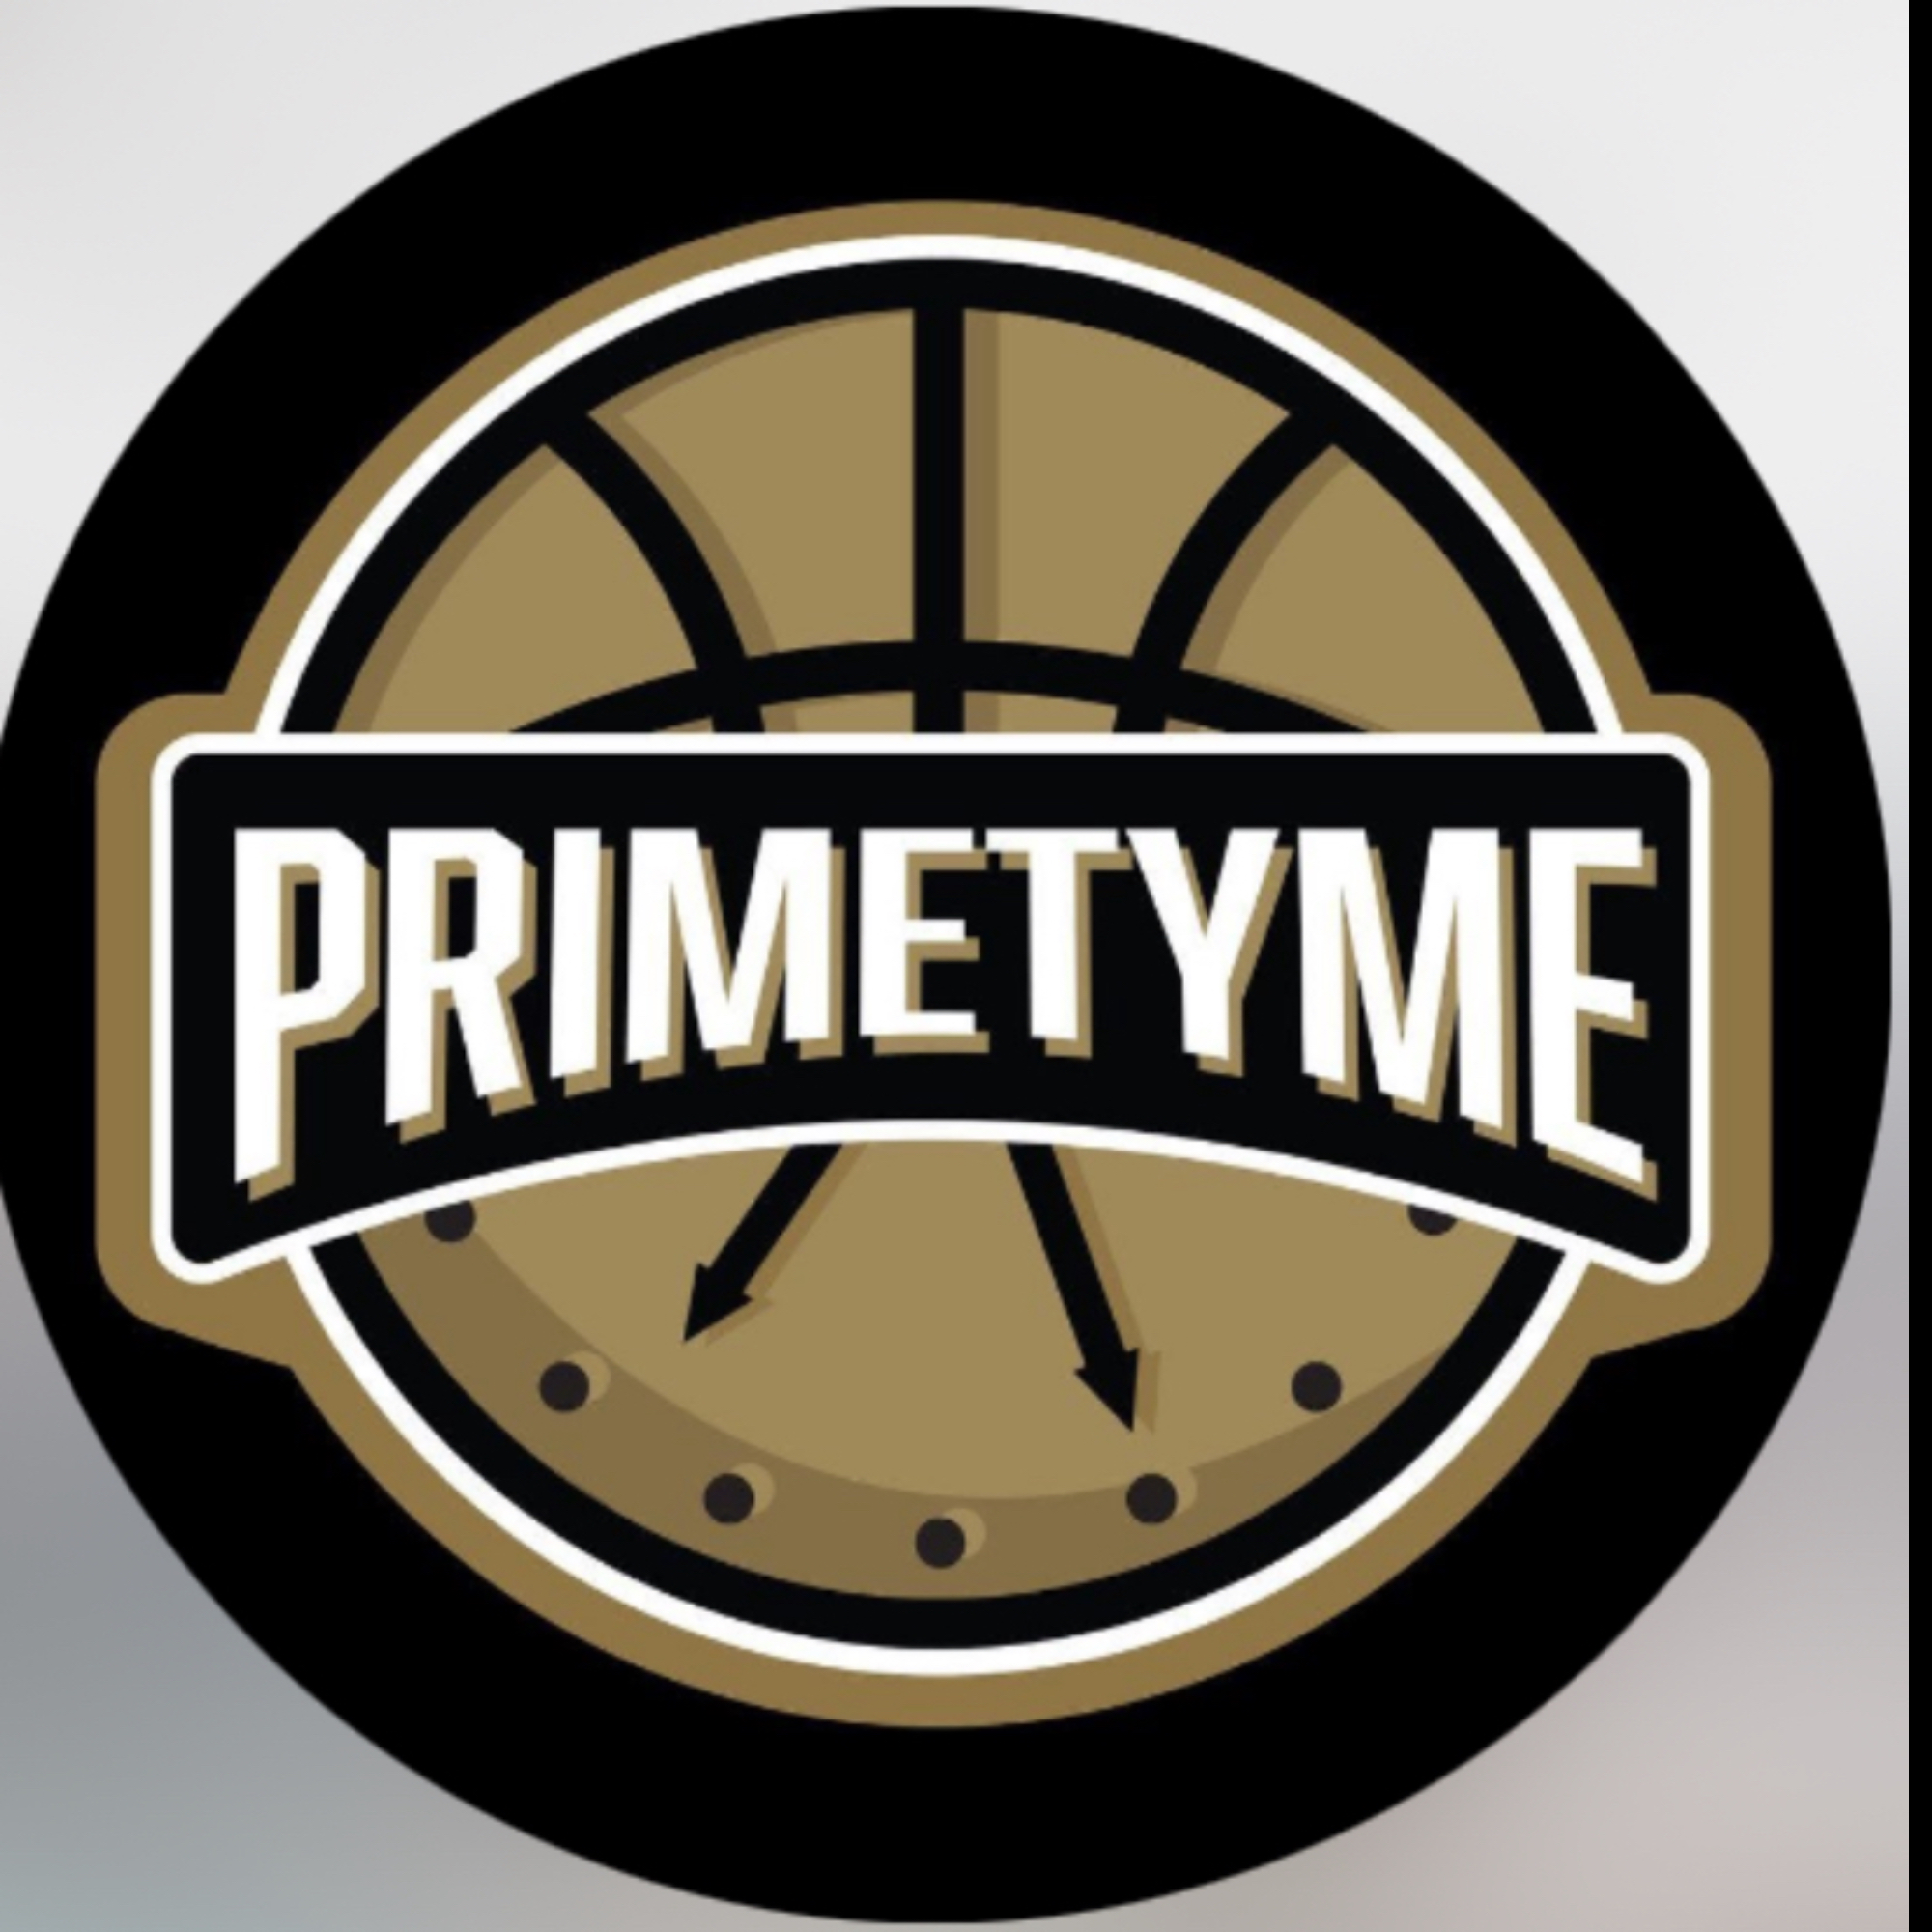 The official logo of PrimeTyme